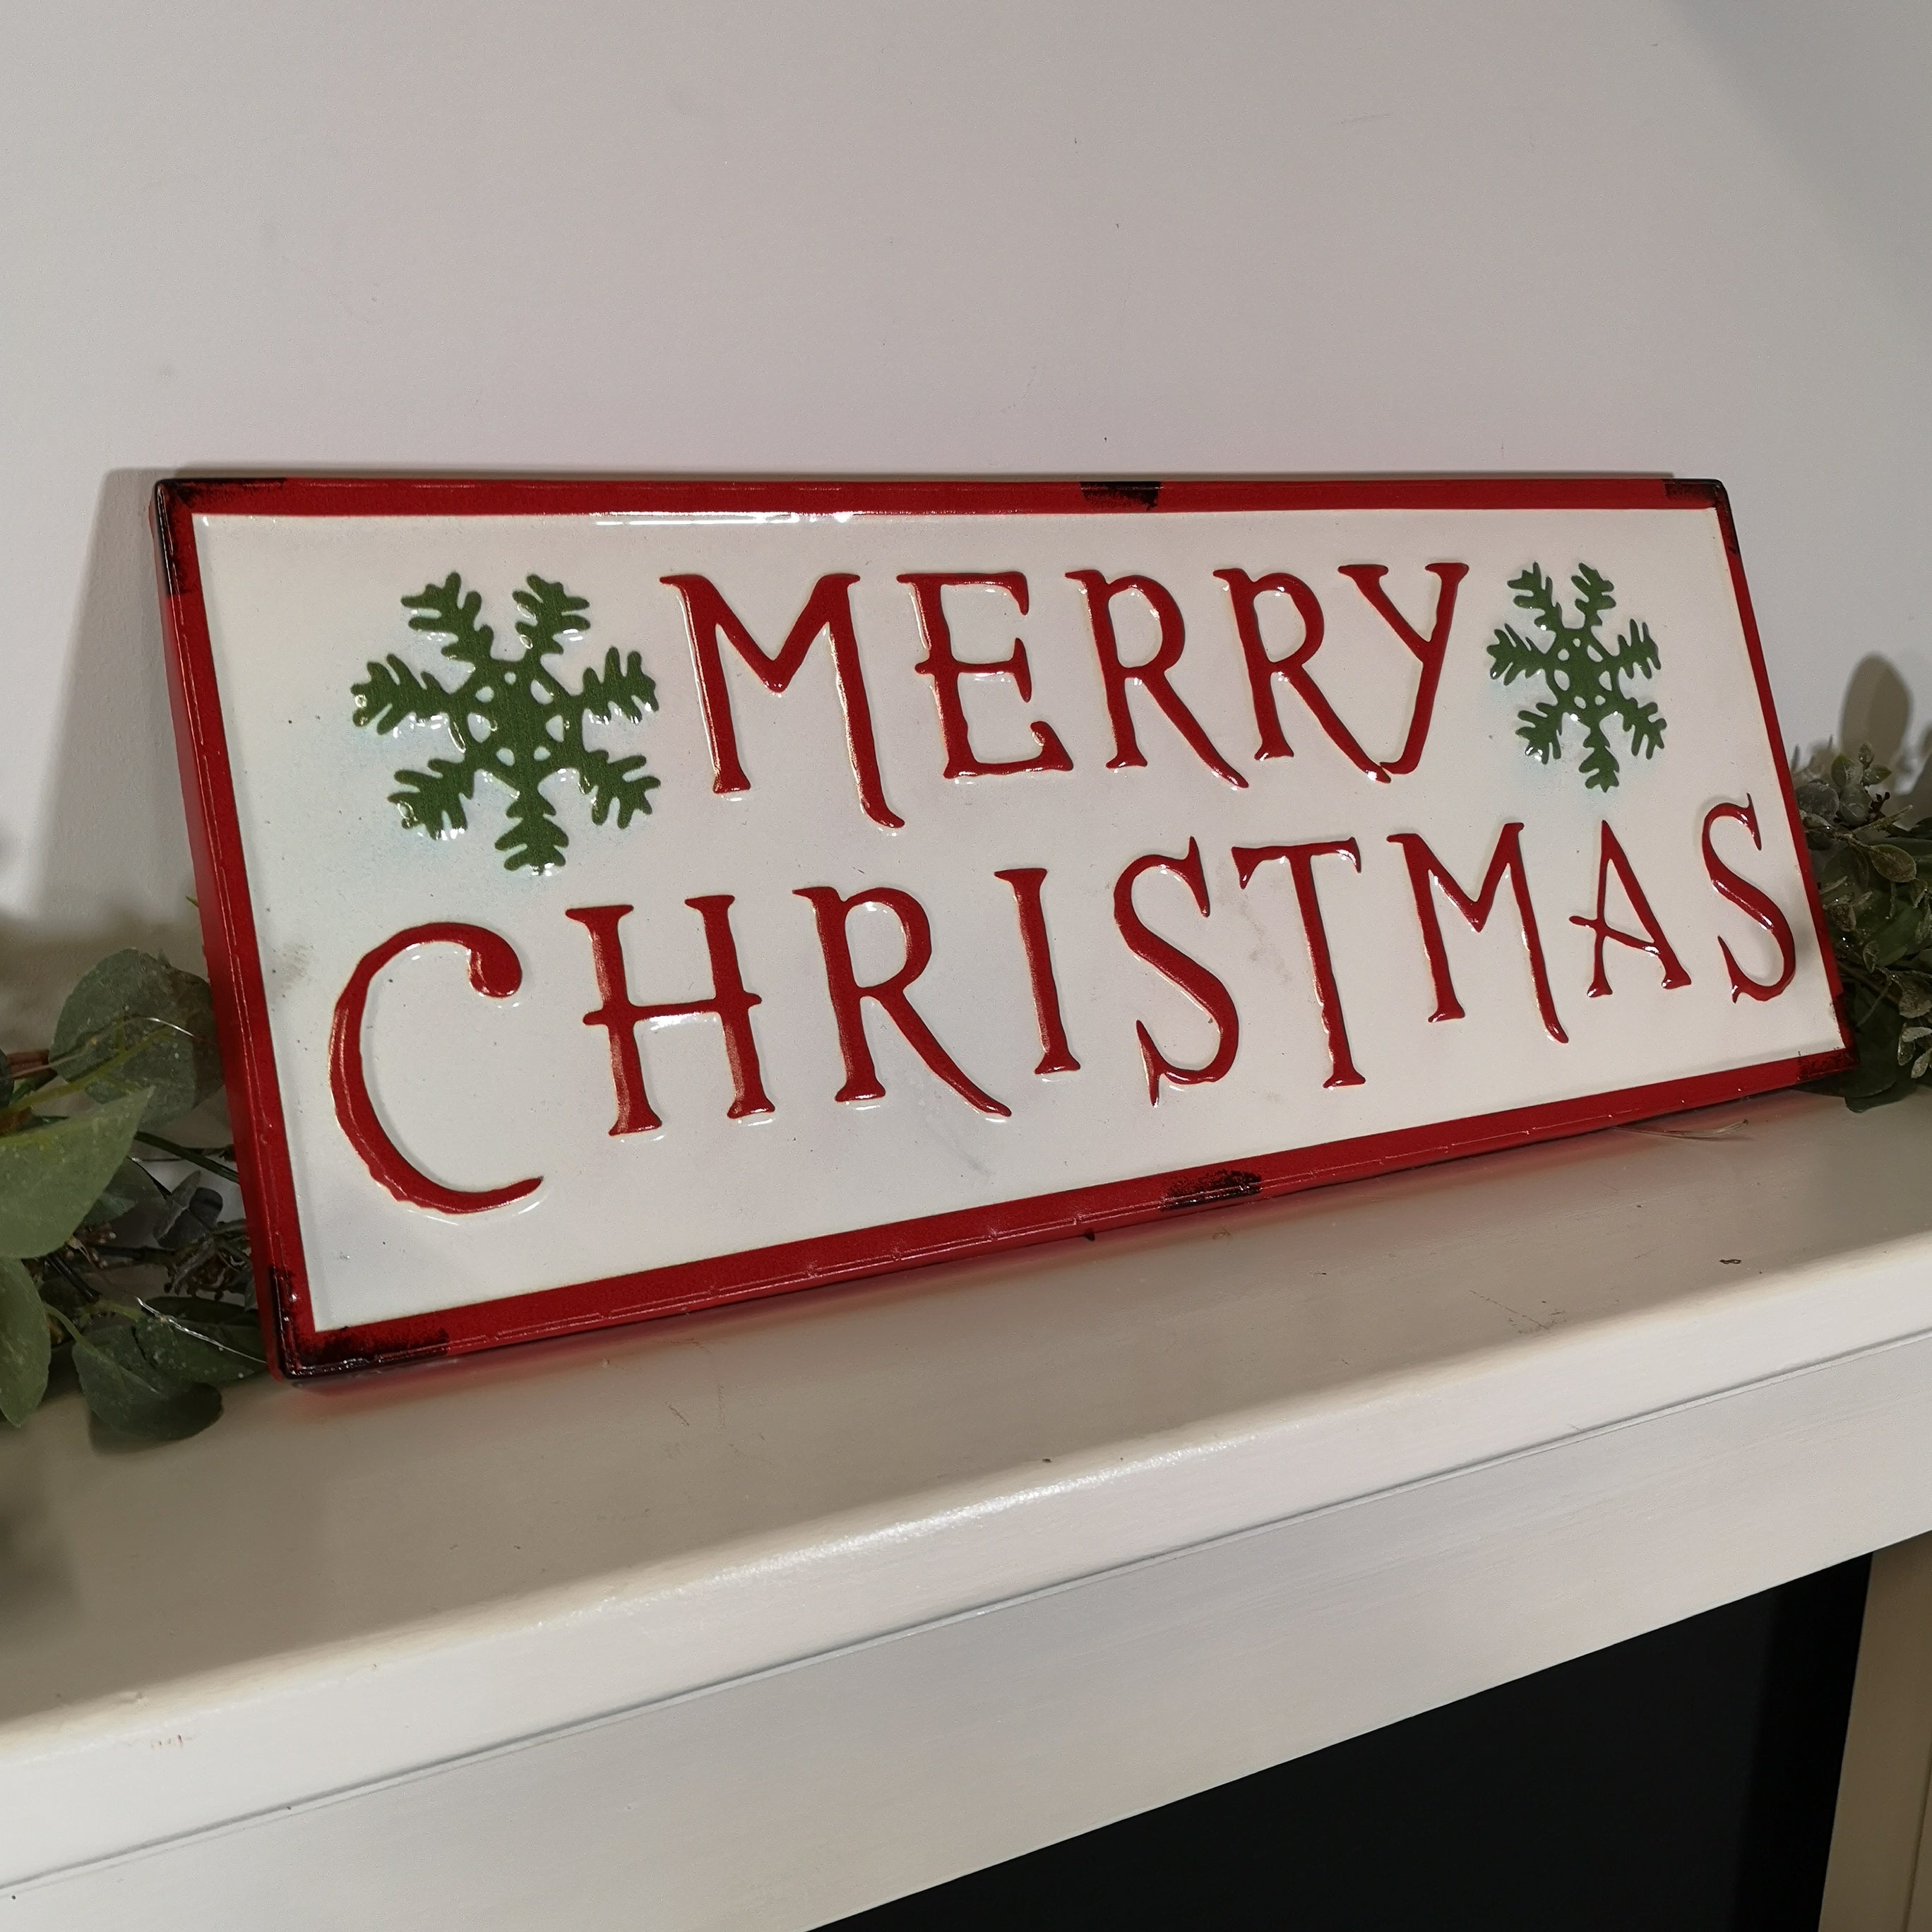 57cm Merry Christmas Metal Sign with Snowflake in Red White and Green